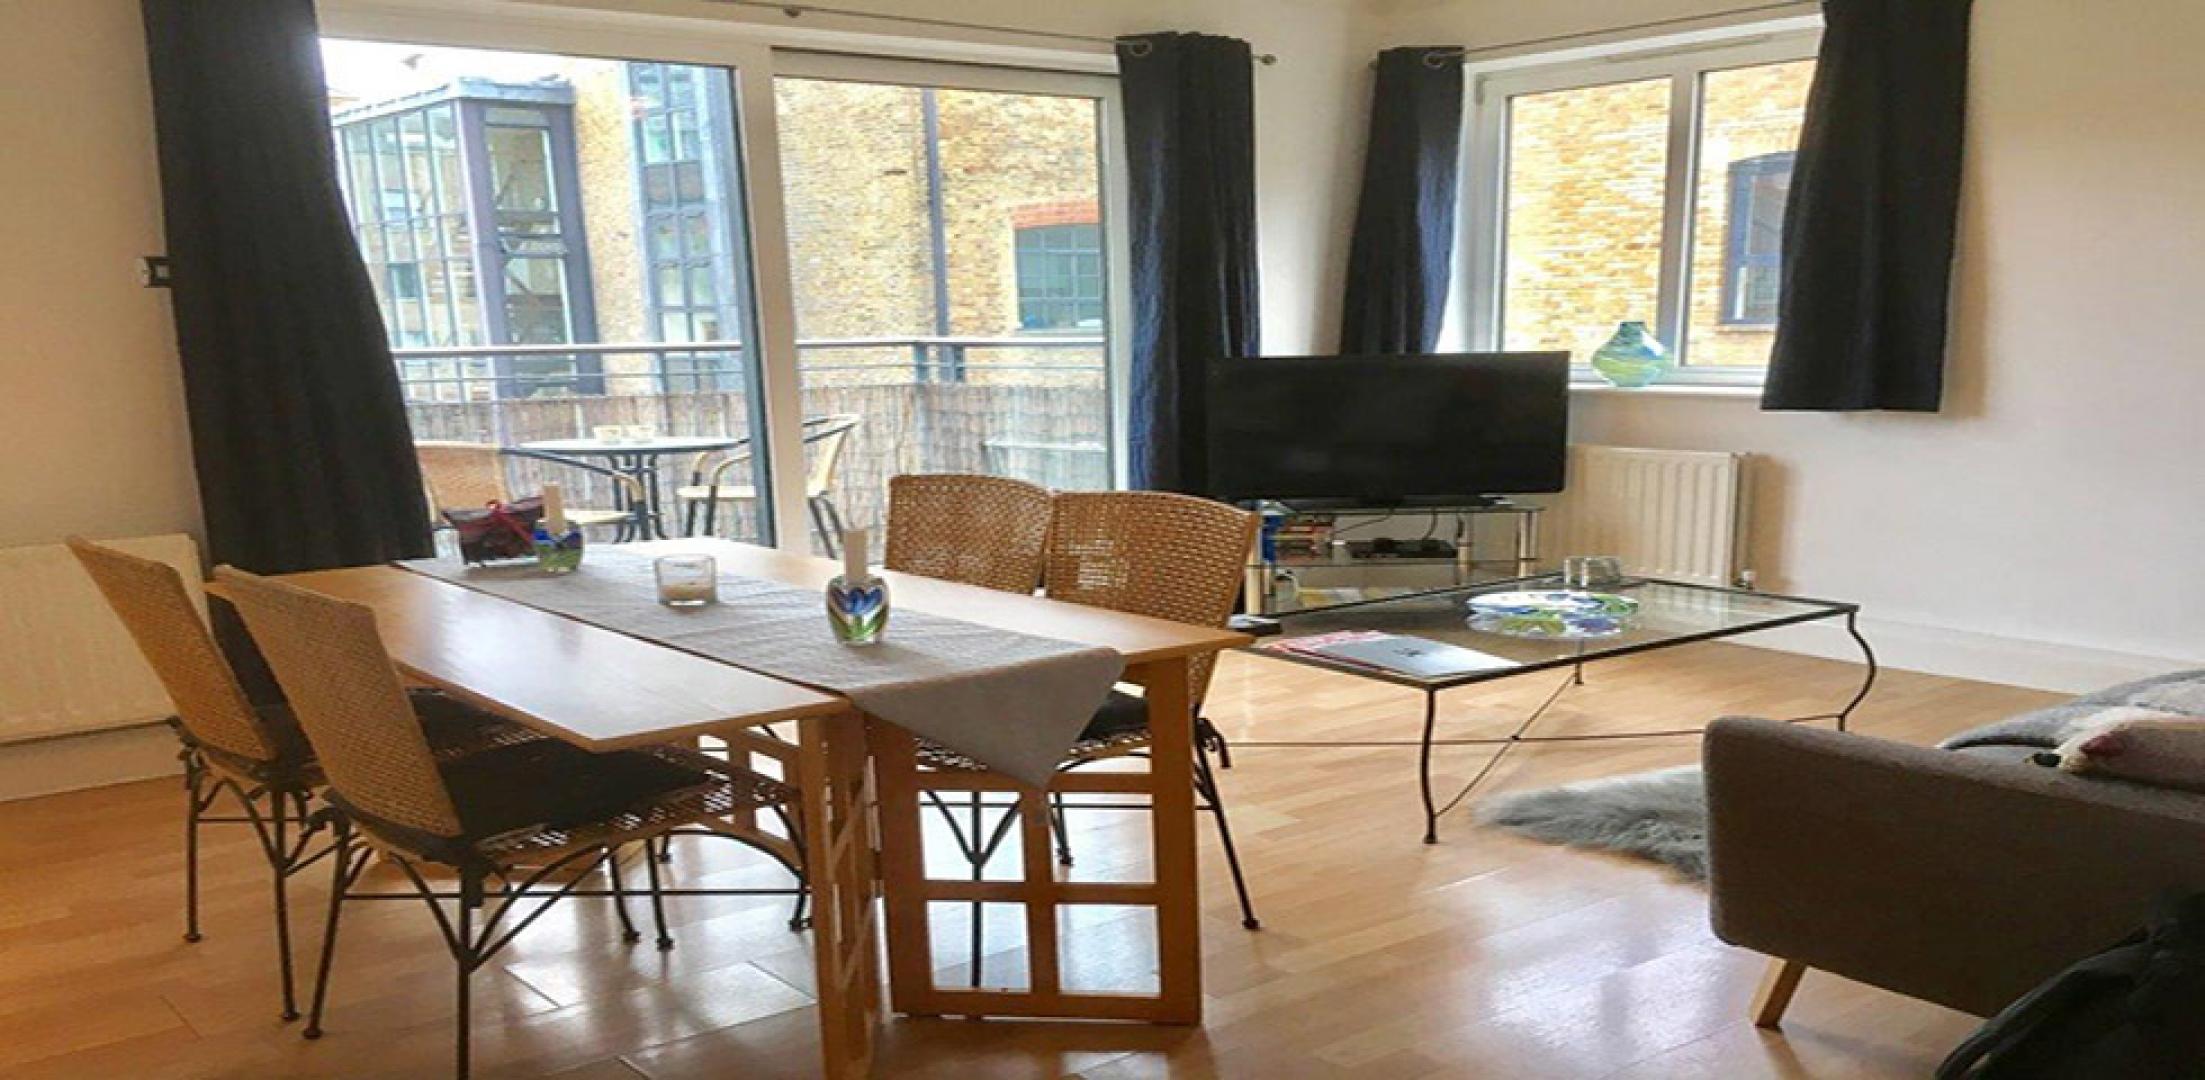 Contemporary apartment with 24 hr. Concierge, gym & inclusive of water rates Providence Square, Shad Thames SE1